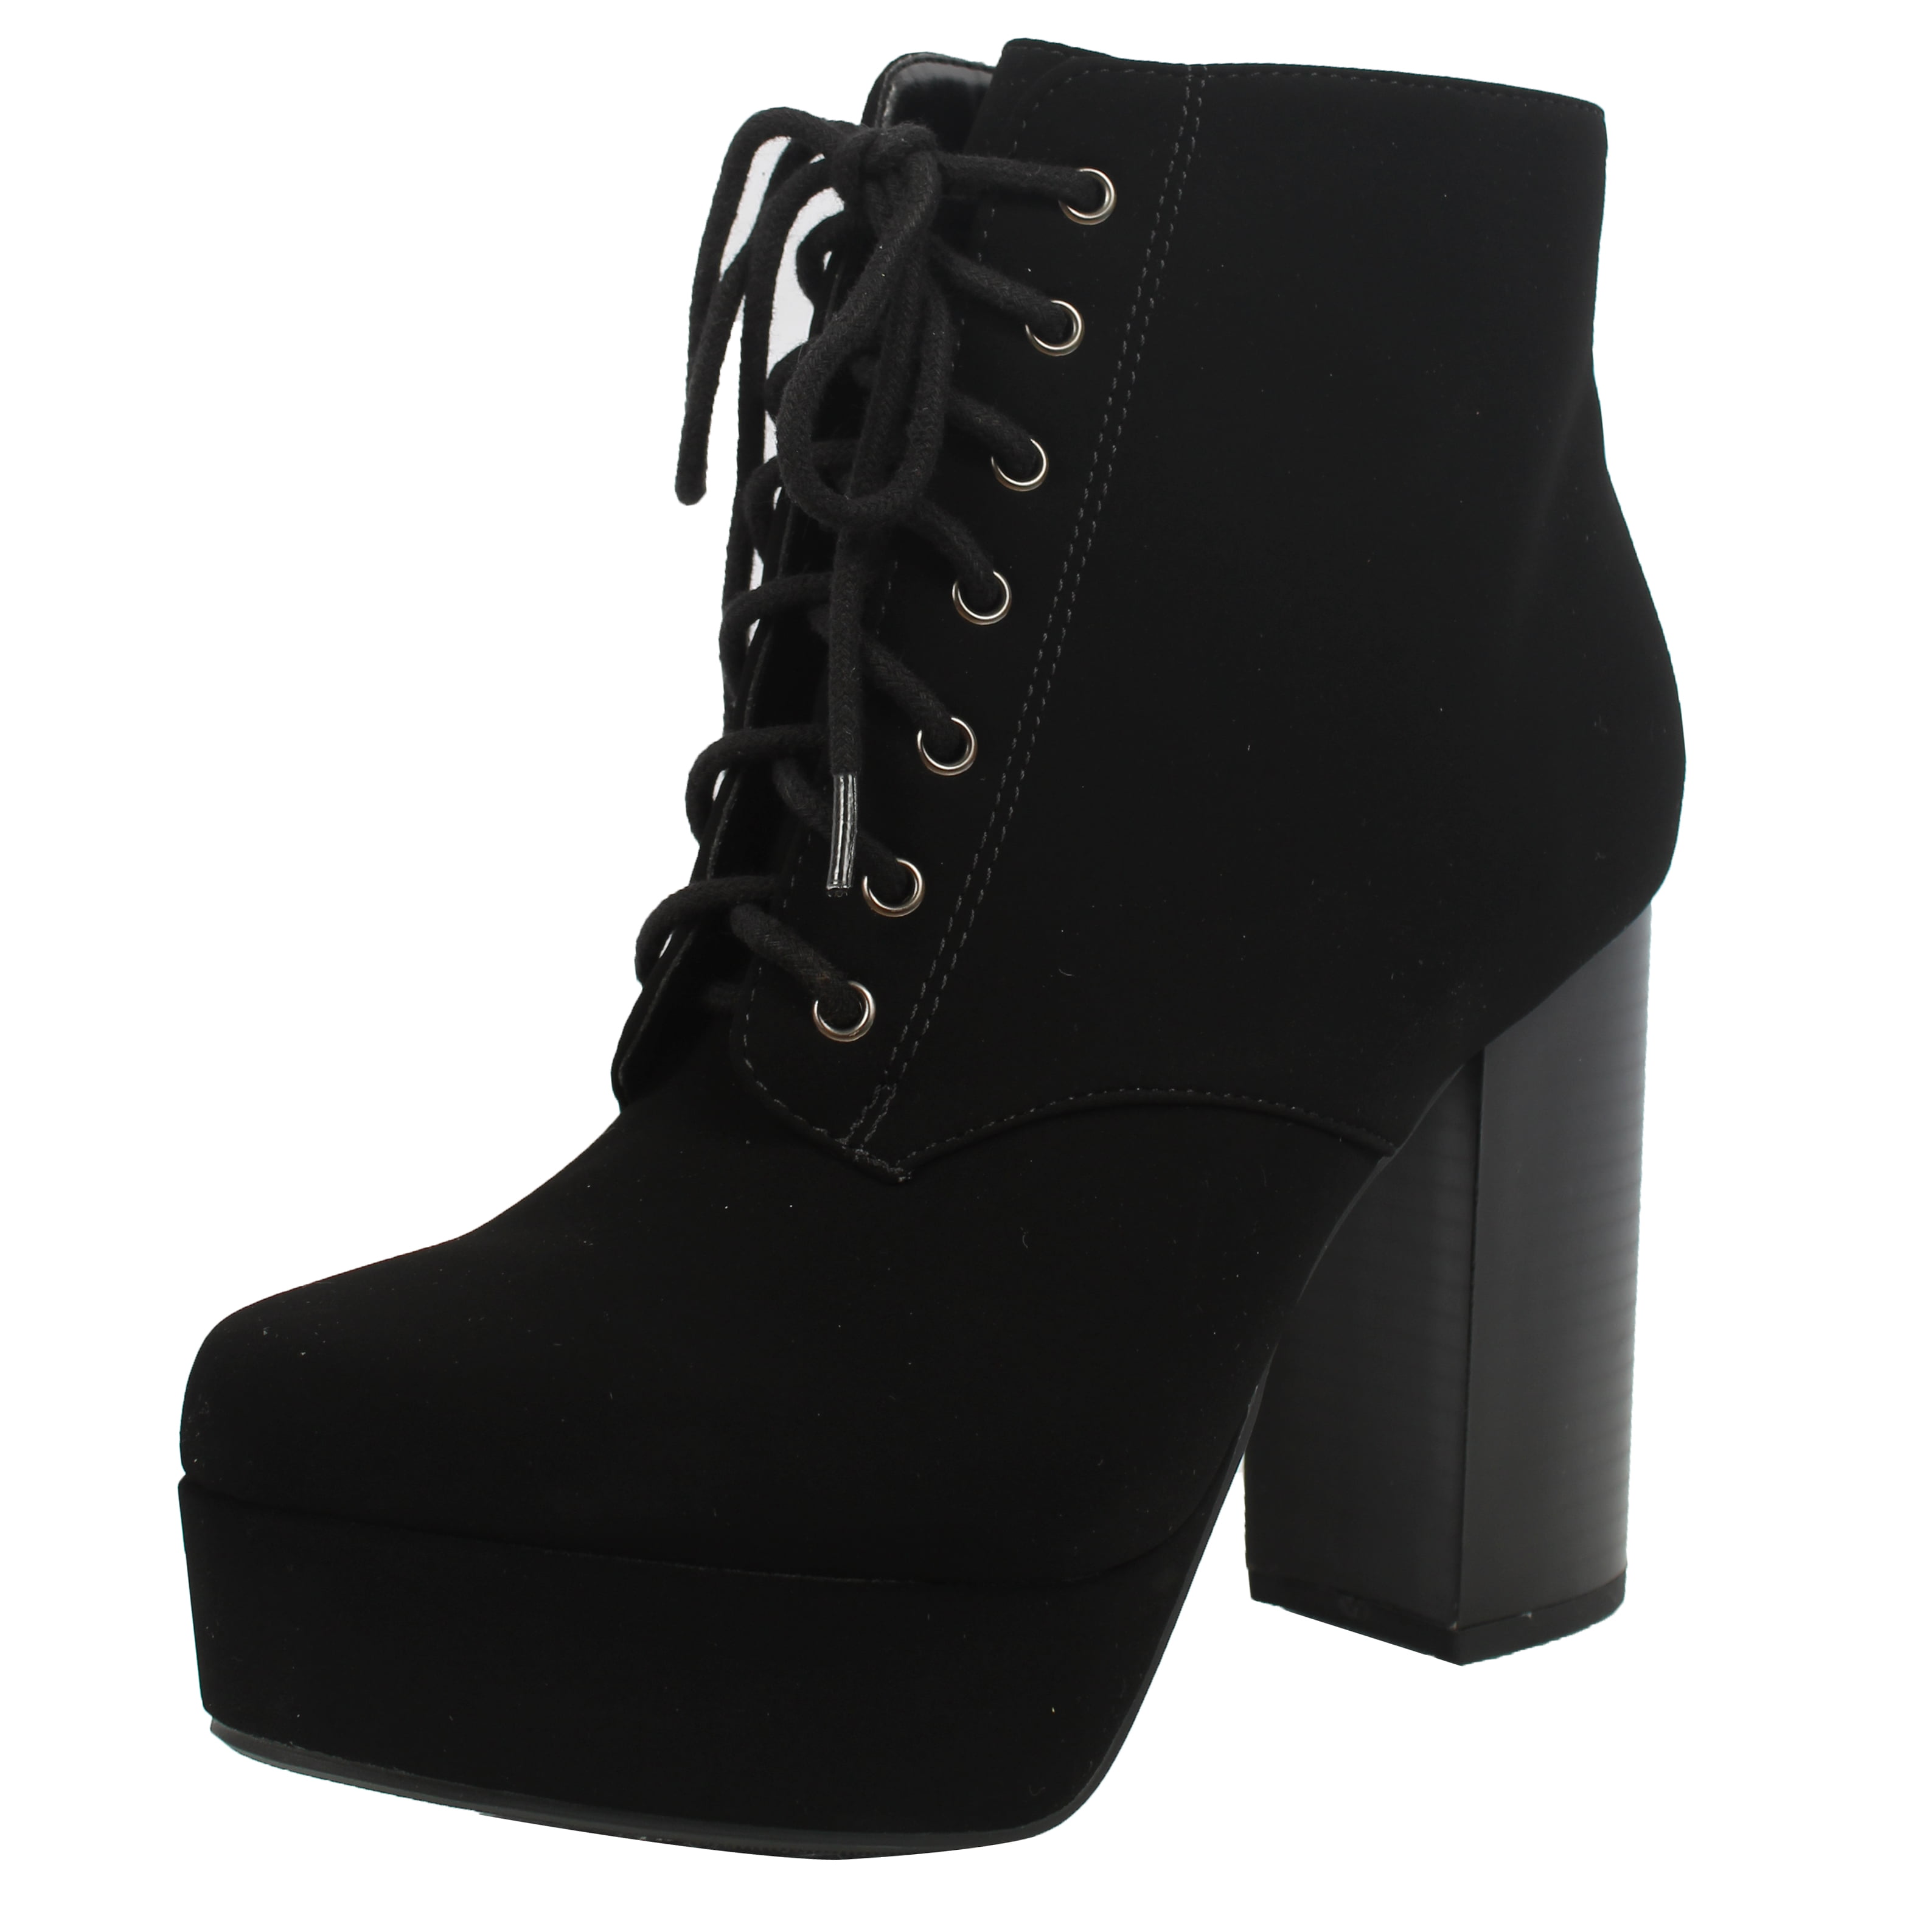 My Delicious Shoes - Delicious Women's Lace Up Platform Chunky Block ...